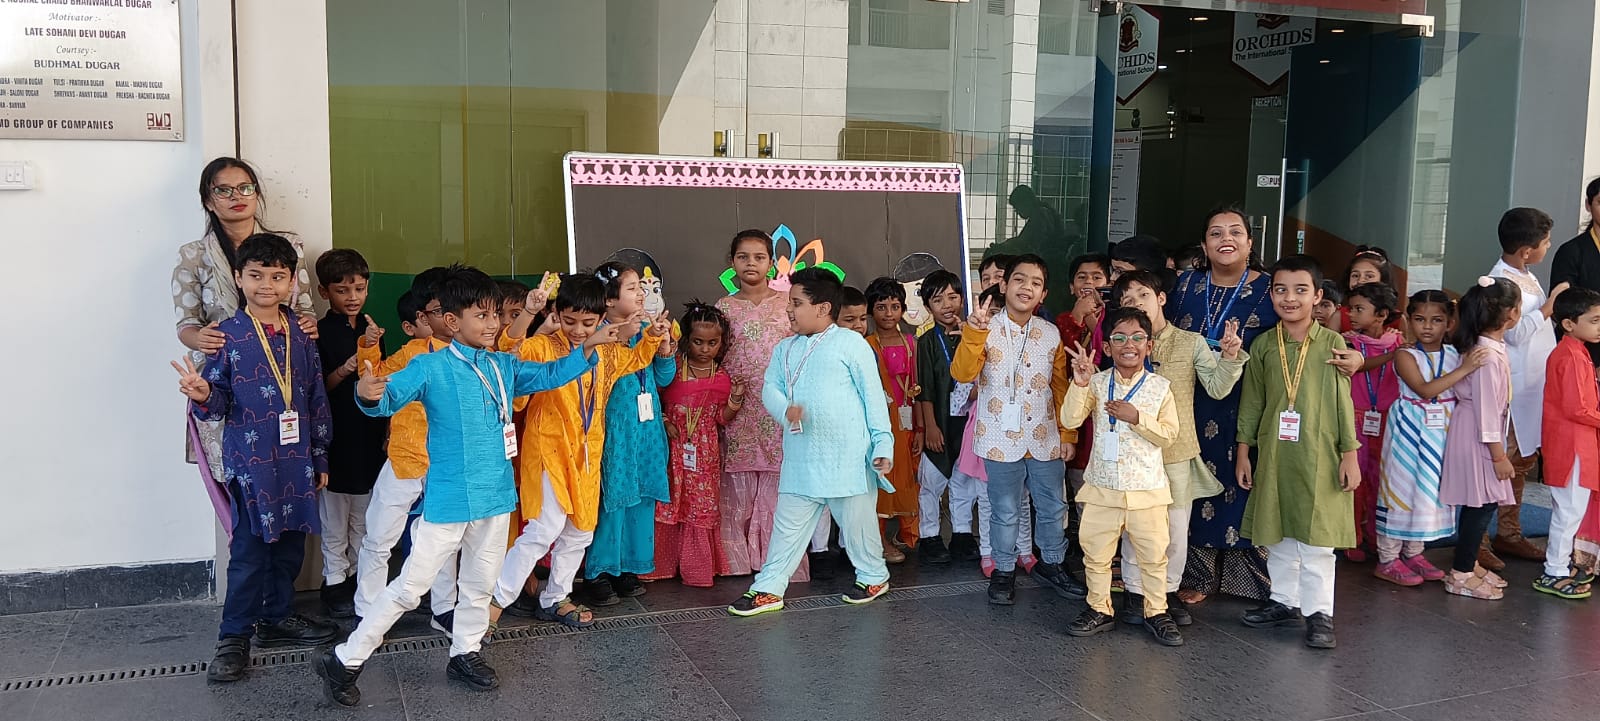 Double celebration at Acharya Tulsi Academy Orchids The International School as students celebrate Diwali with the city’s traffic guards and kids from Prayajan NGO